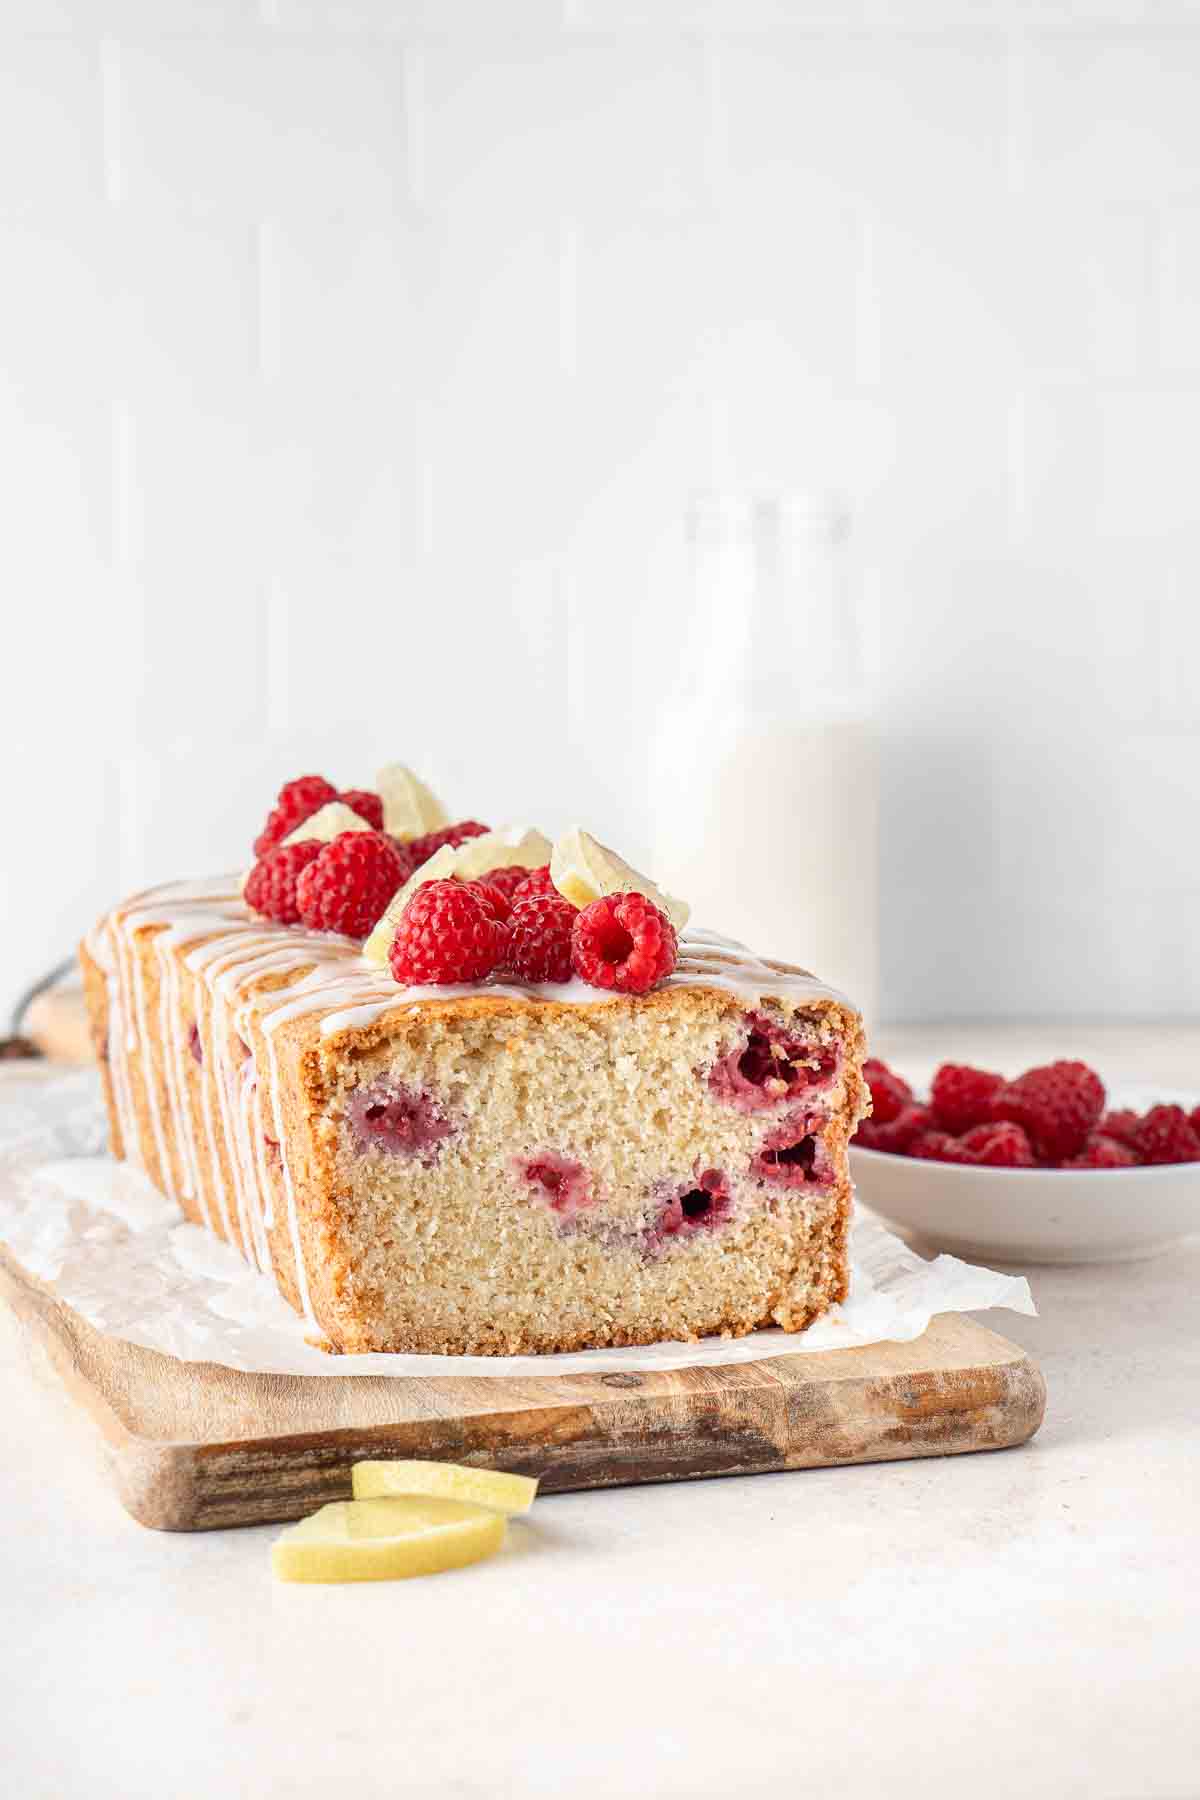 Raspberry and lemon loaf cake topped with more raspberries and lemon slices.